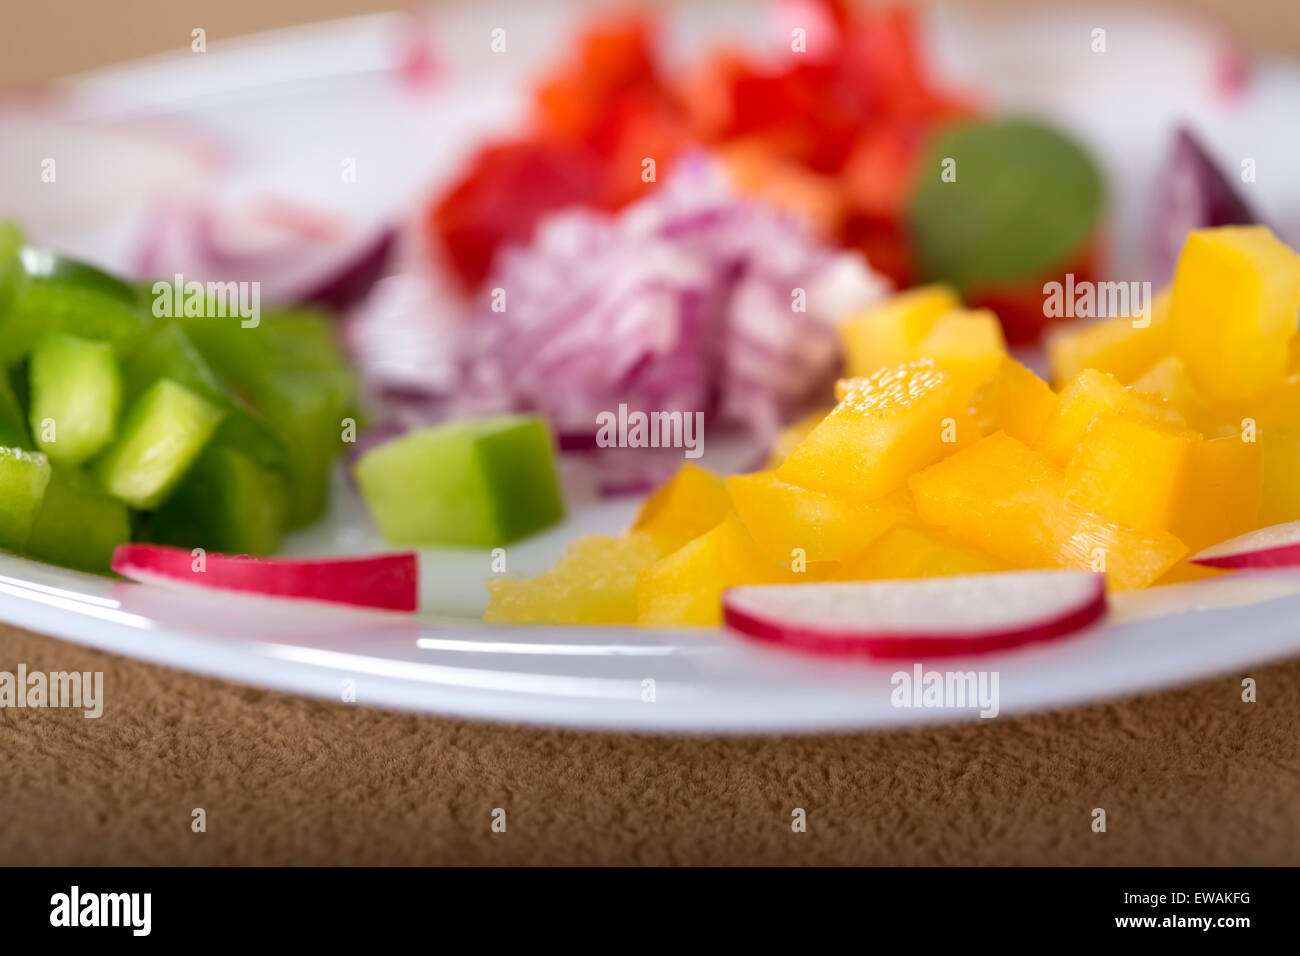 Close up of some fresh chopped vegetables on white plate for salad Stock Photo